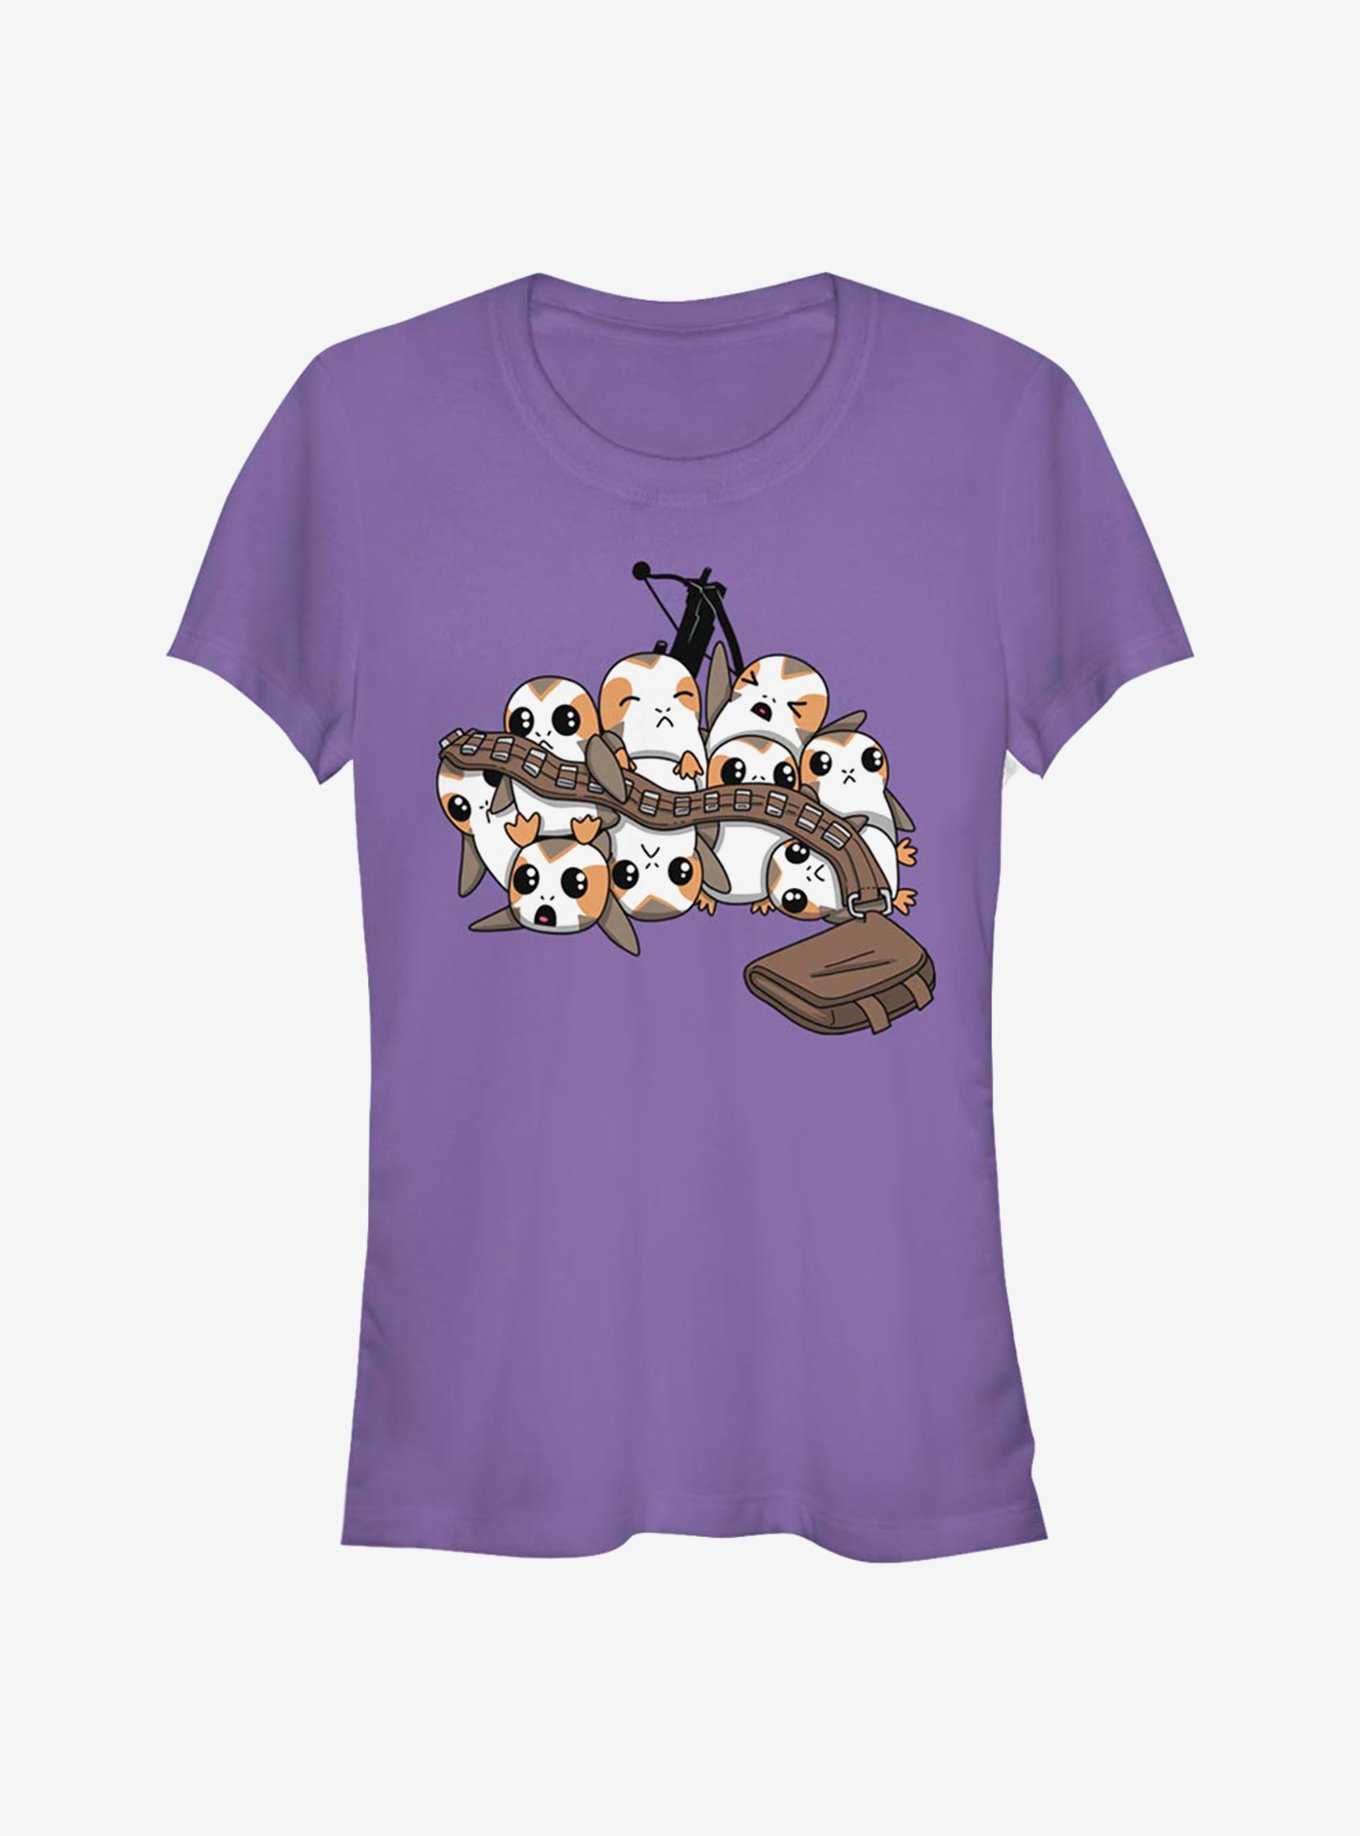 Star Wars: The Last Jedi Porgs And Chewbacca Accessories Girls T-Shirt, , hi-res